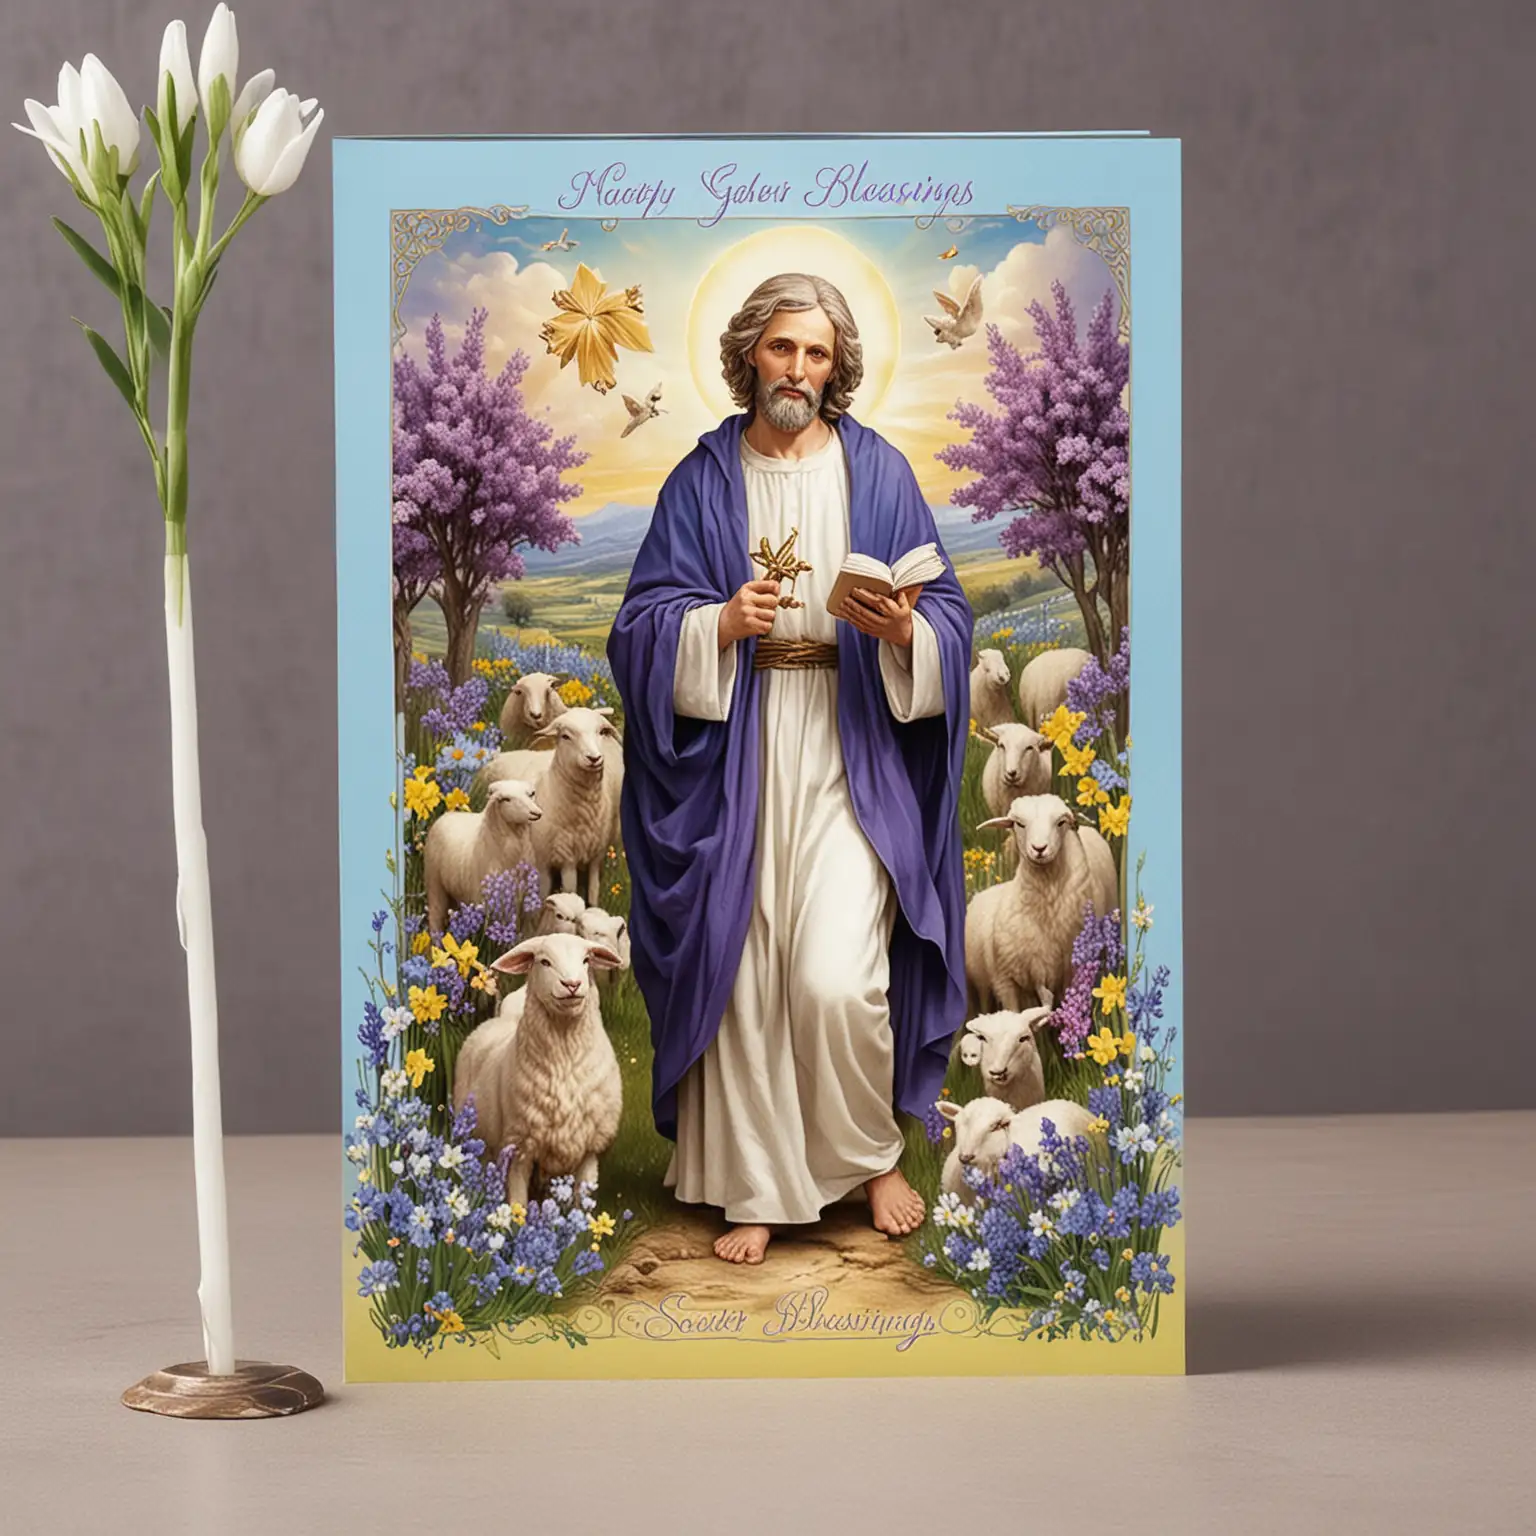 Card size 11.5 x 17 cm.   Picture of Good Shepherd - catholic design in the centre. Background with Easter flowers, purple, blue, yellow, white.  Wording at top of card Easter Blessings